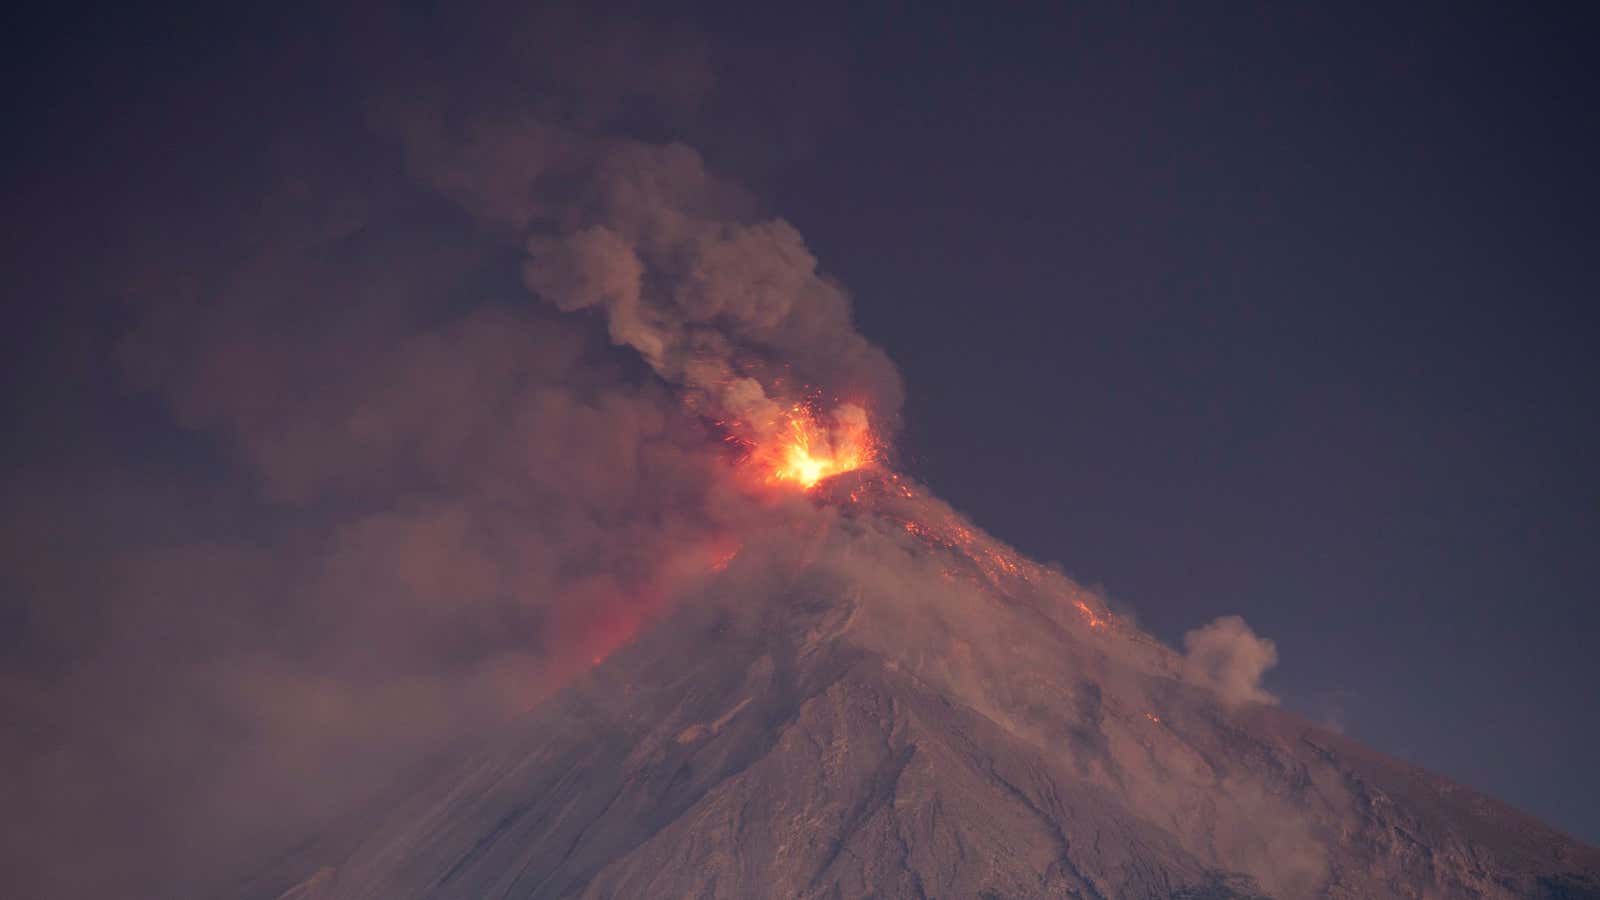 The volcano’s June eruption killed almost 200 people. Hundreds are still missing.